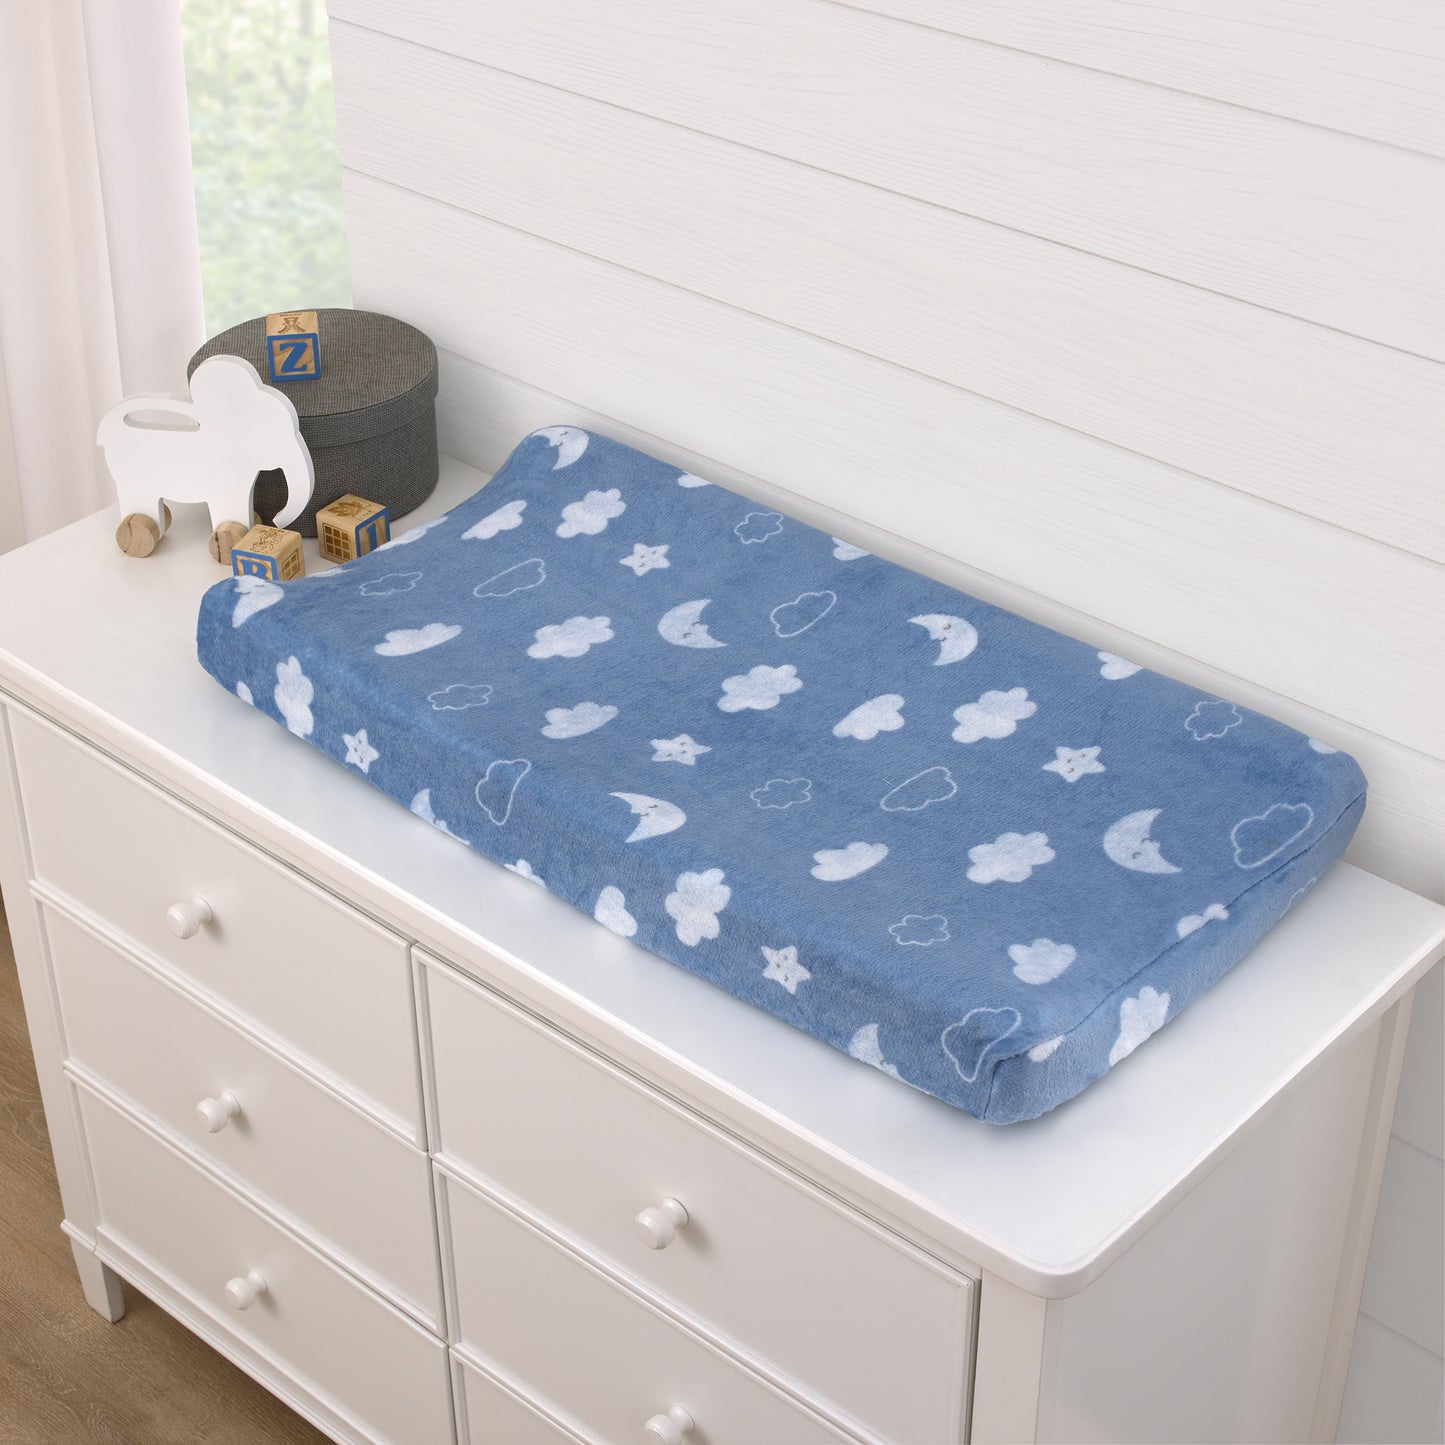 Carter's Blue Elephant - Chambray, and White Clouds, Moon and Stars Super Soft Contoured Changing Pad Cover